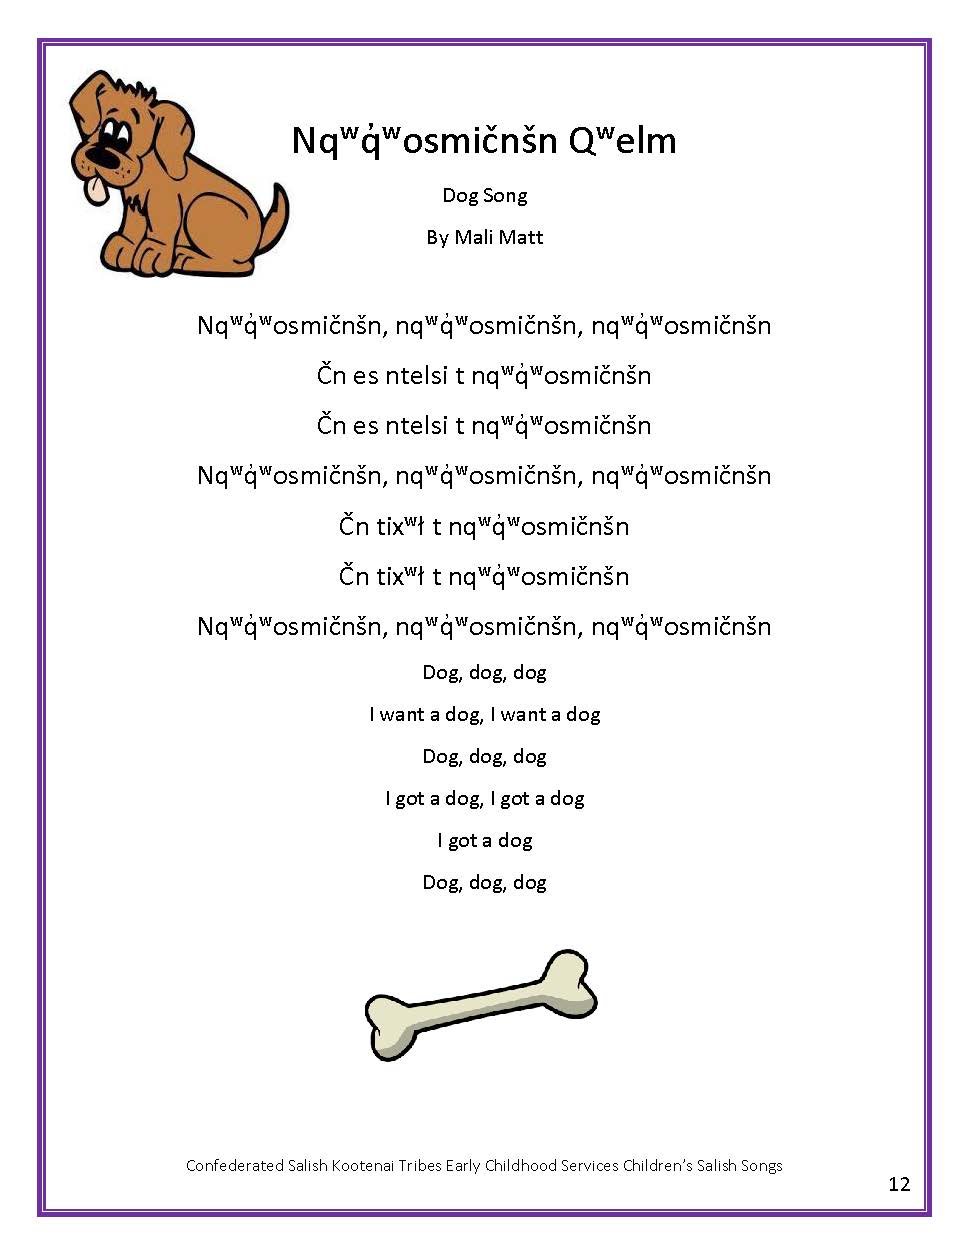 ECS Childrens Salish Song Book Page 17